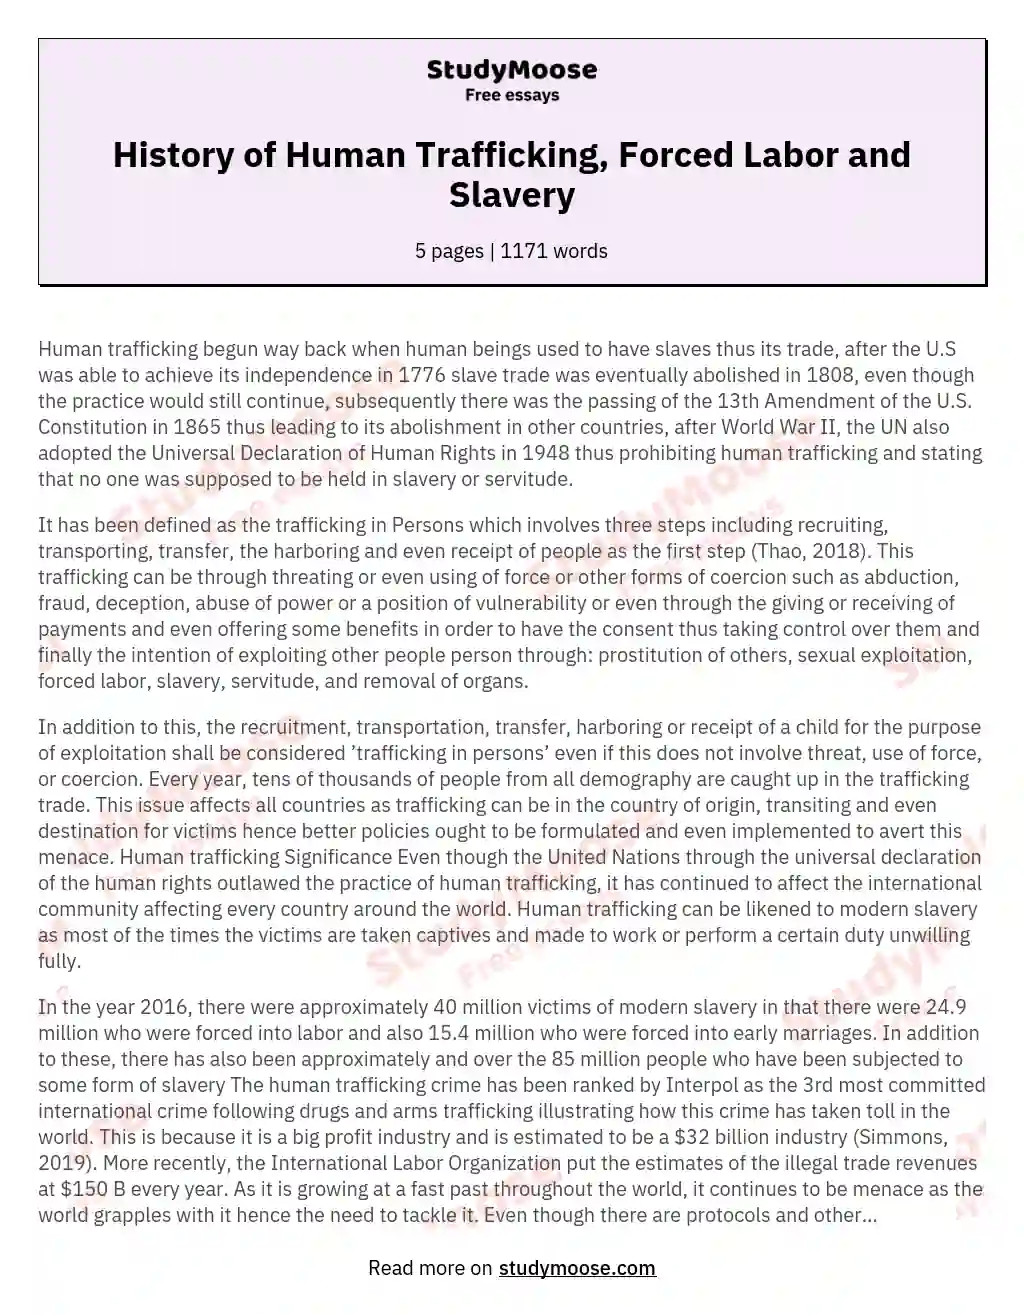 History of Human Trafficking, Forced Labor and Slavery